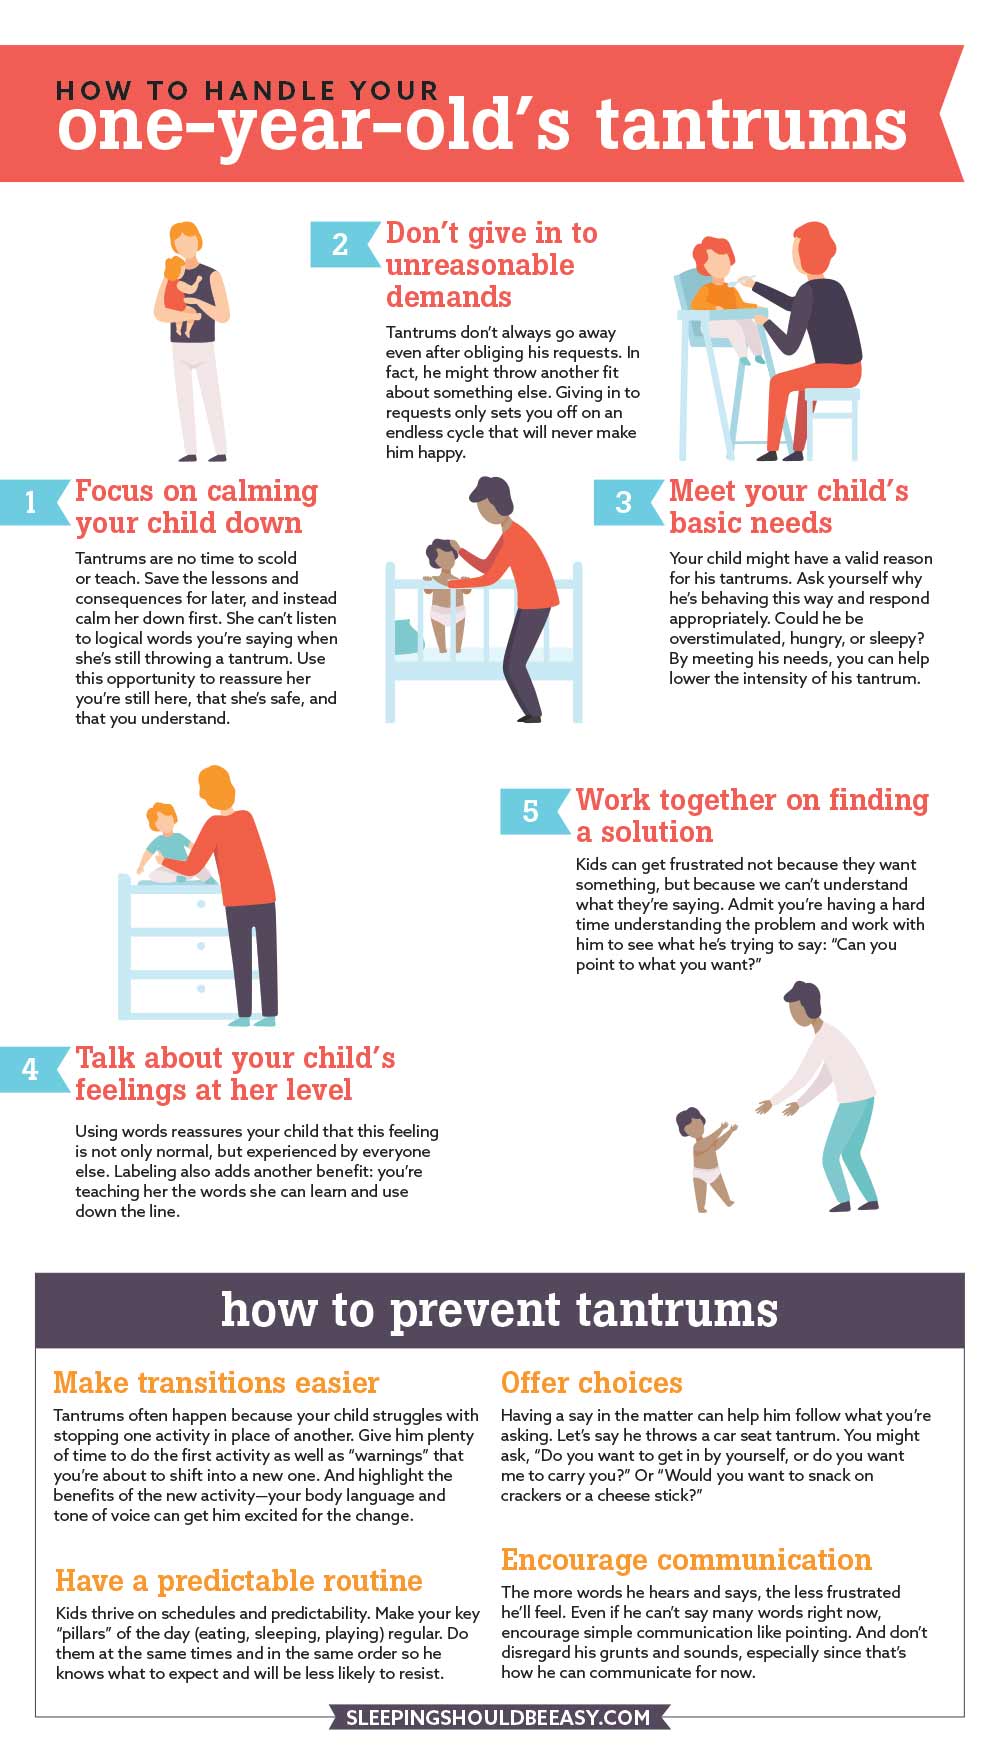 how to handle your 1 year old's tantrums